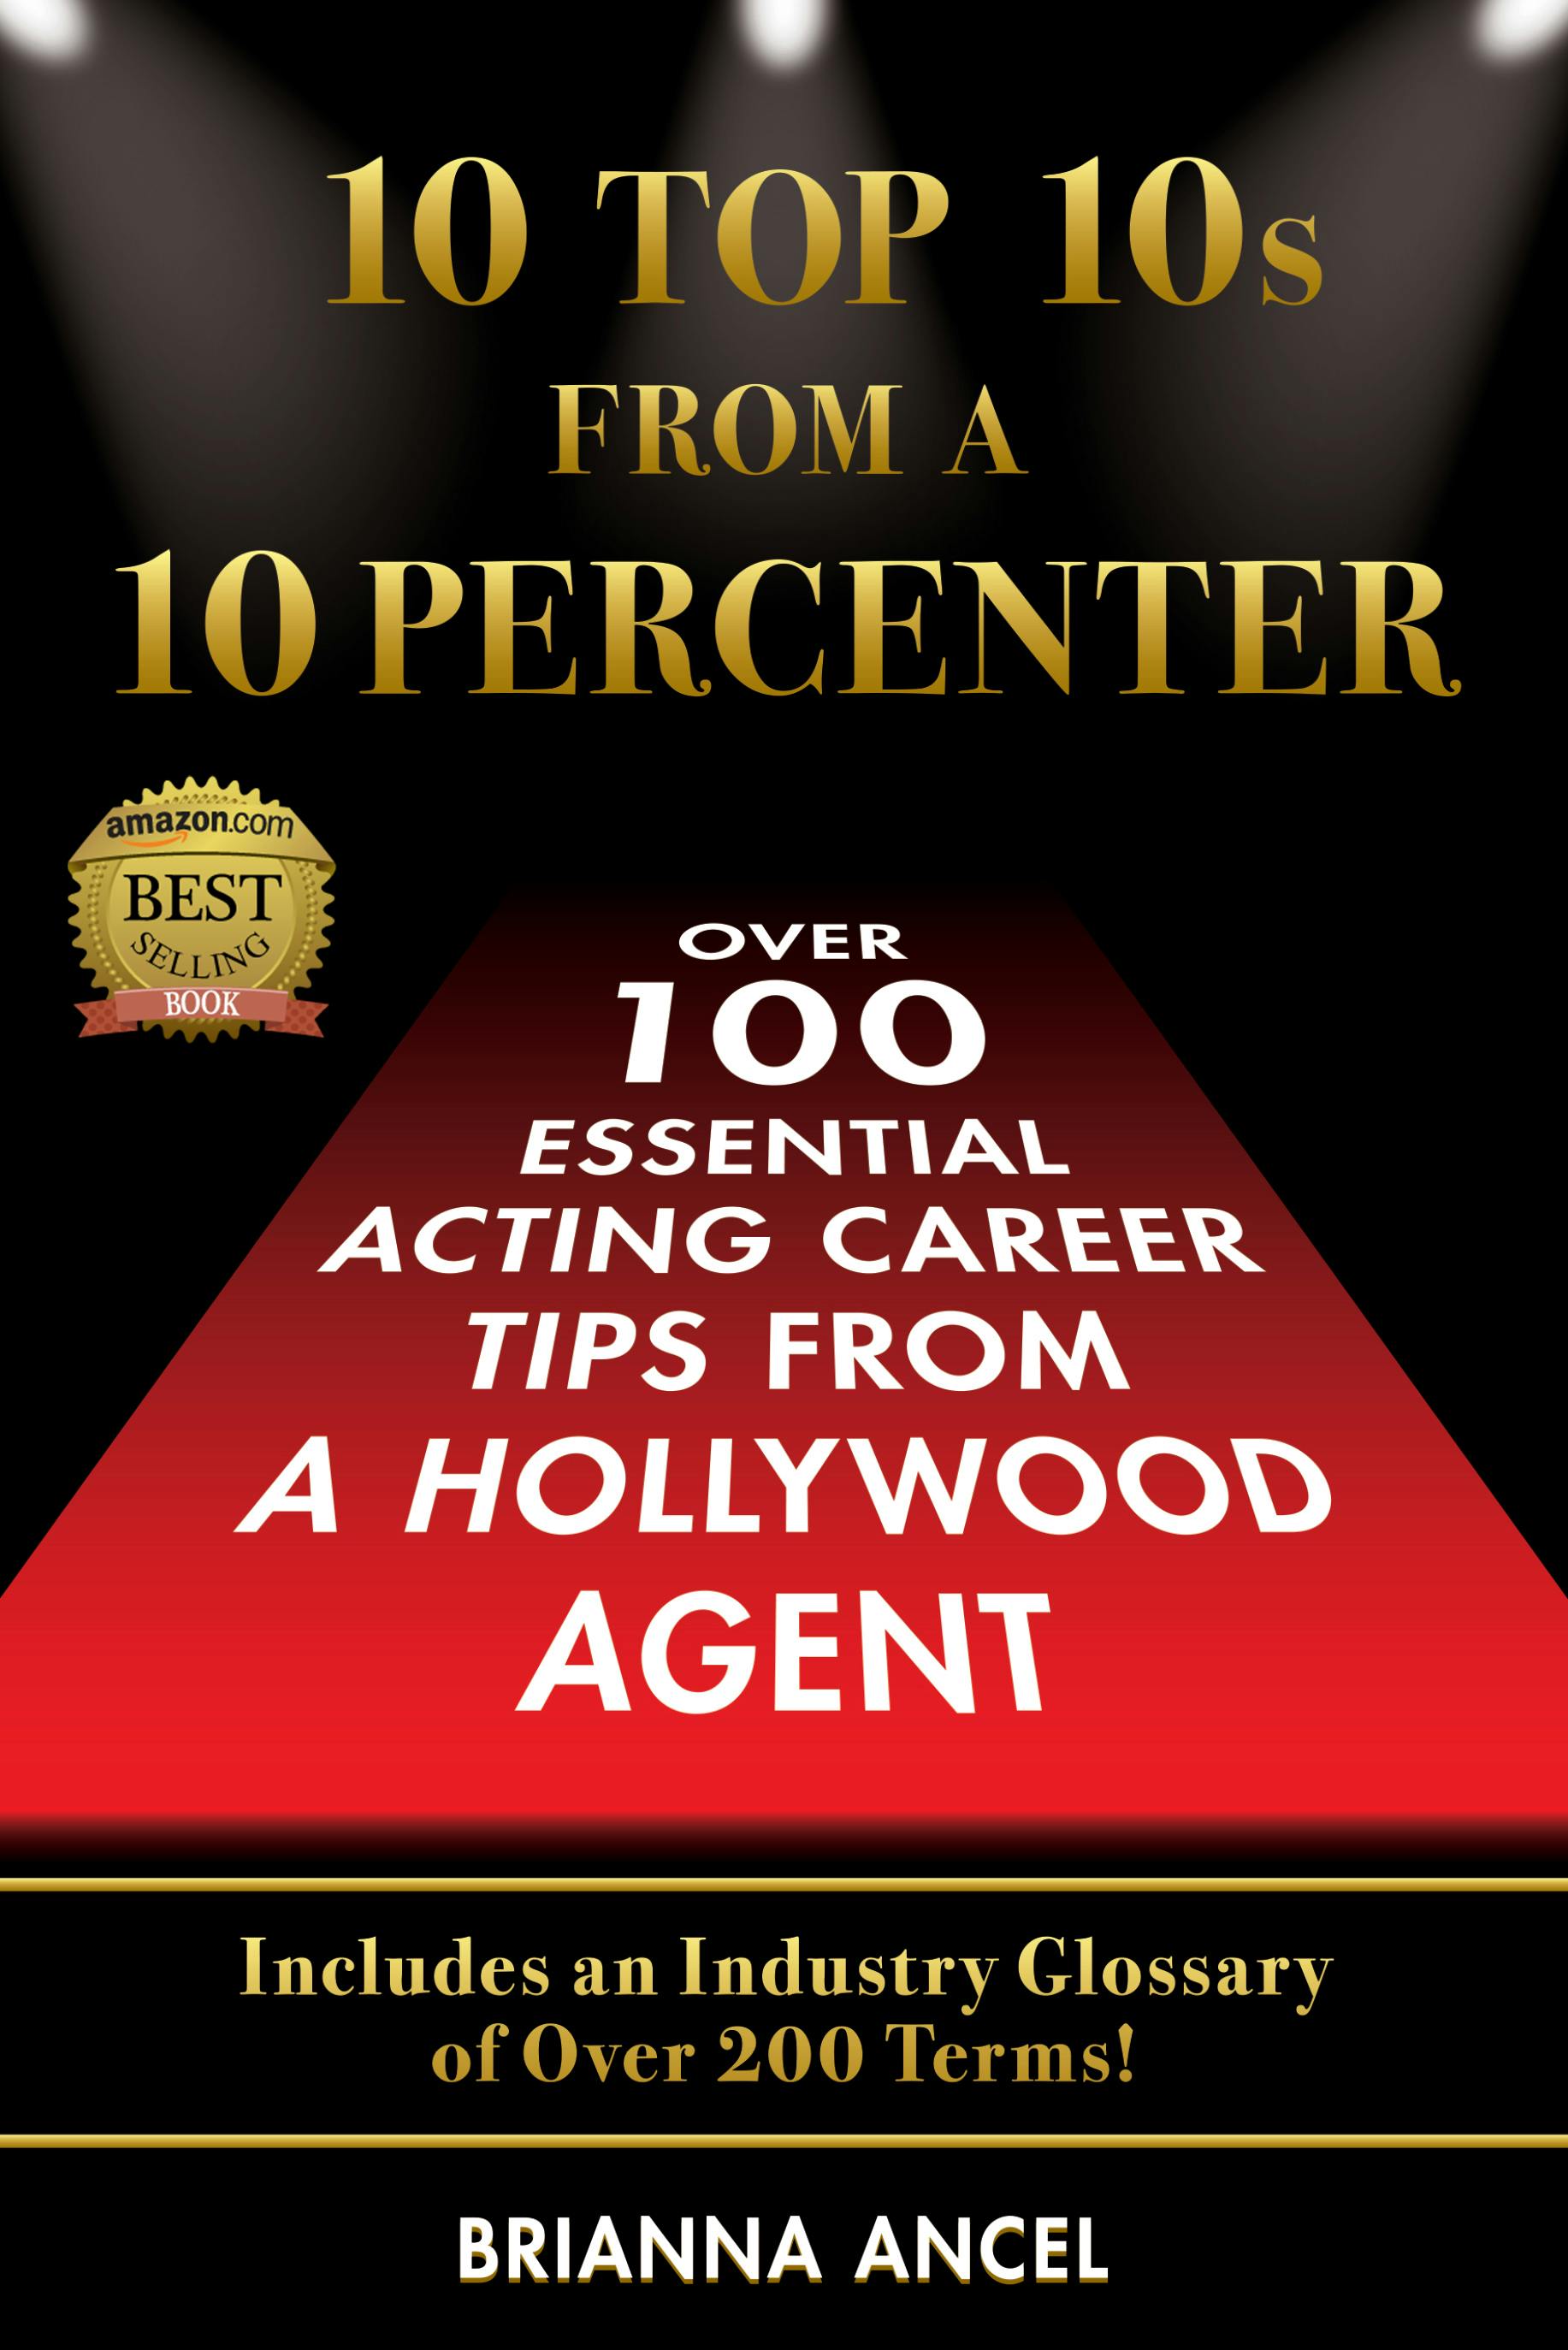 10 Top 10s From A 10 Percenter - Brianna Ancel